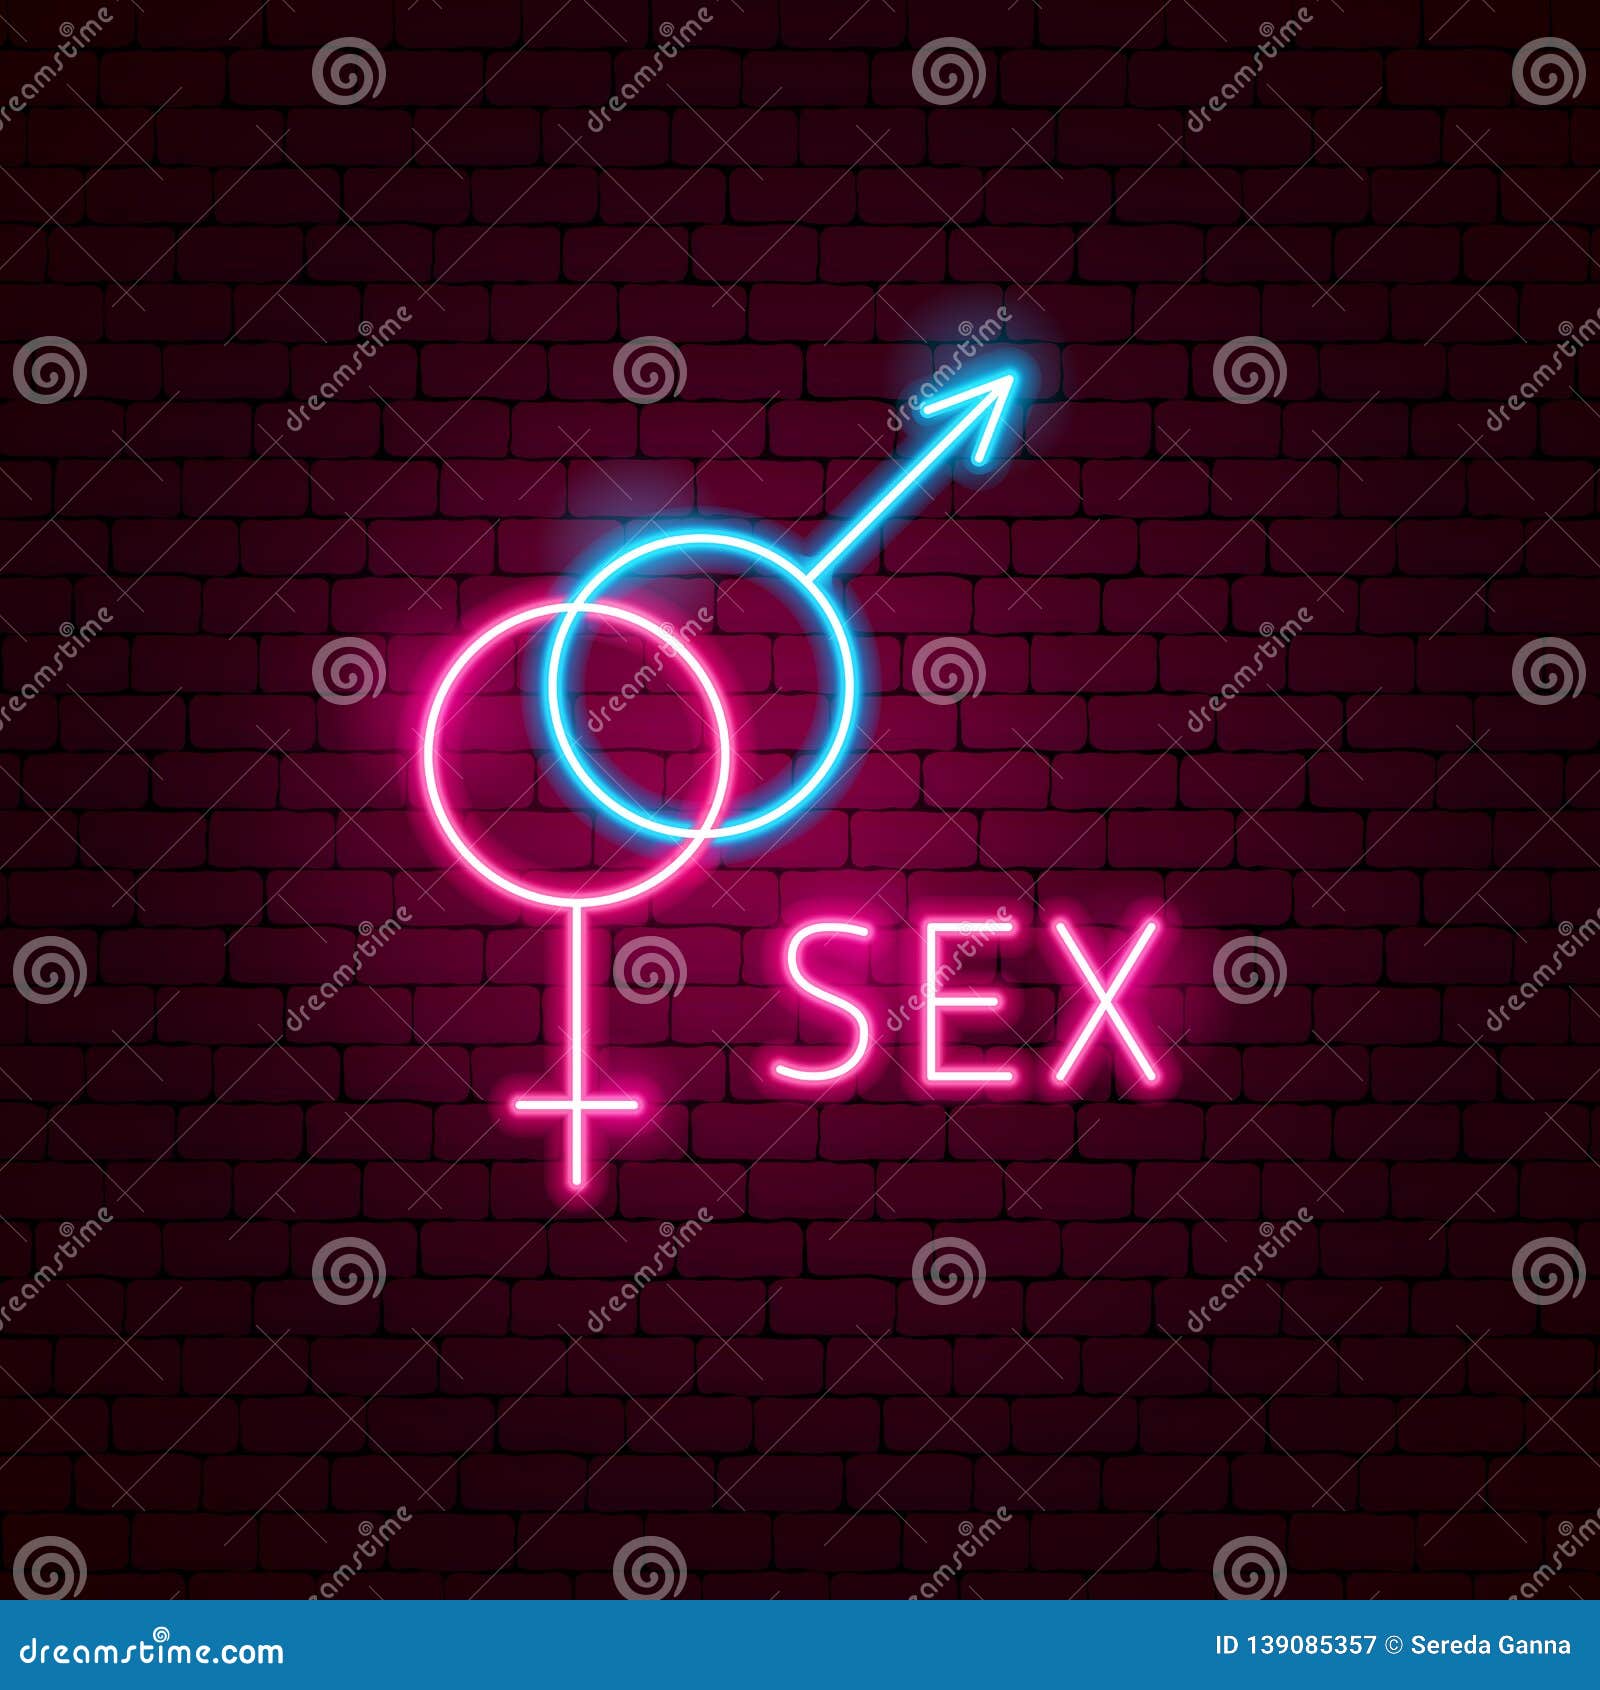 Sex Neon Label Stock Vector Illustration Of Equality 139085357